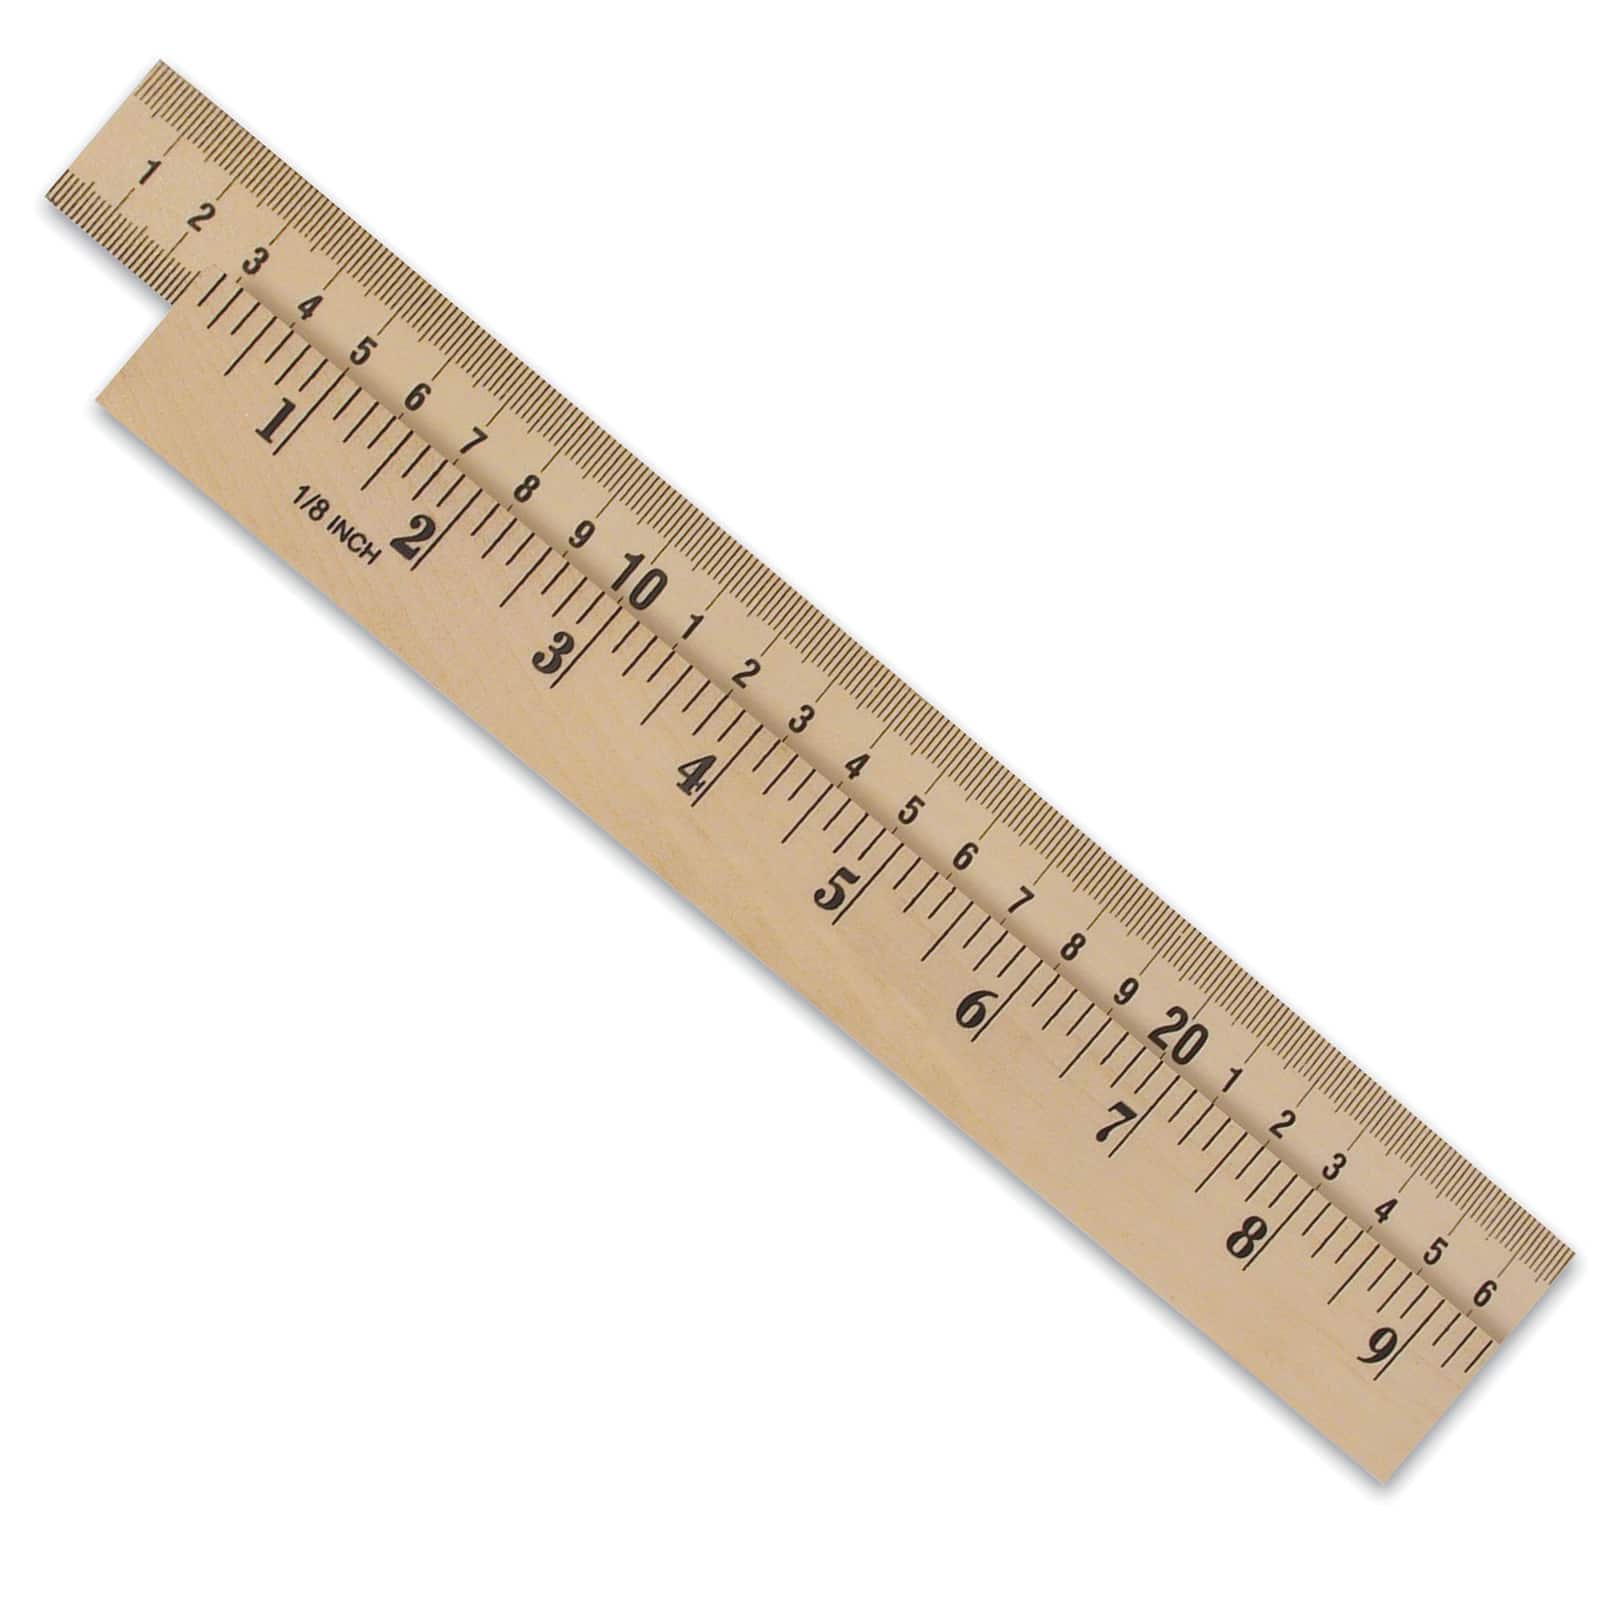 Wooden Meter Stick, Pack of 4